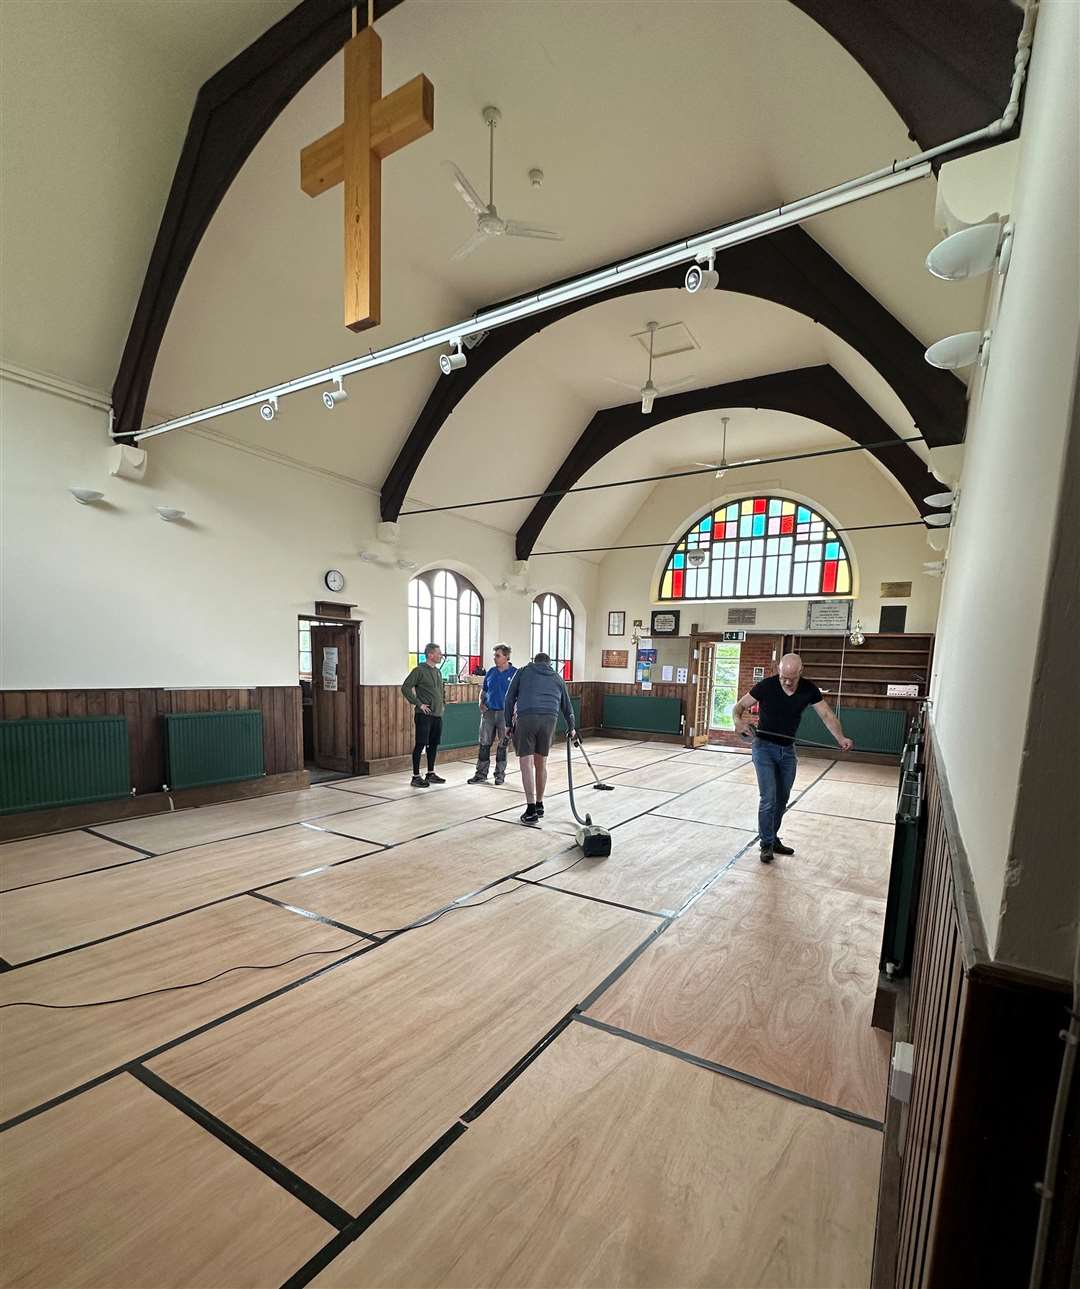 The team and members of the community came together to get new flooring and paint the church. Photo: Rosy King